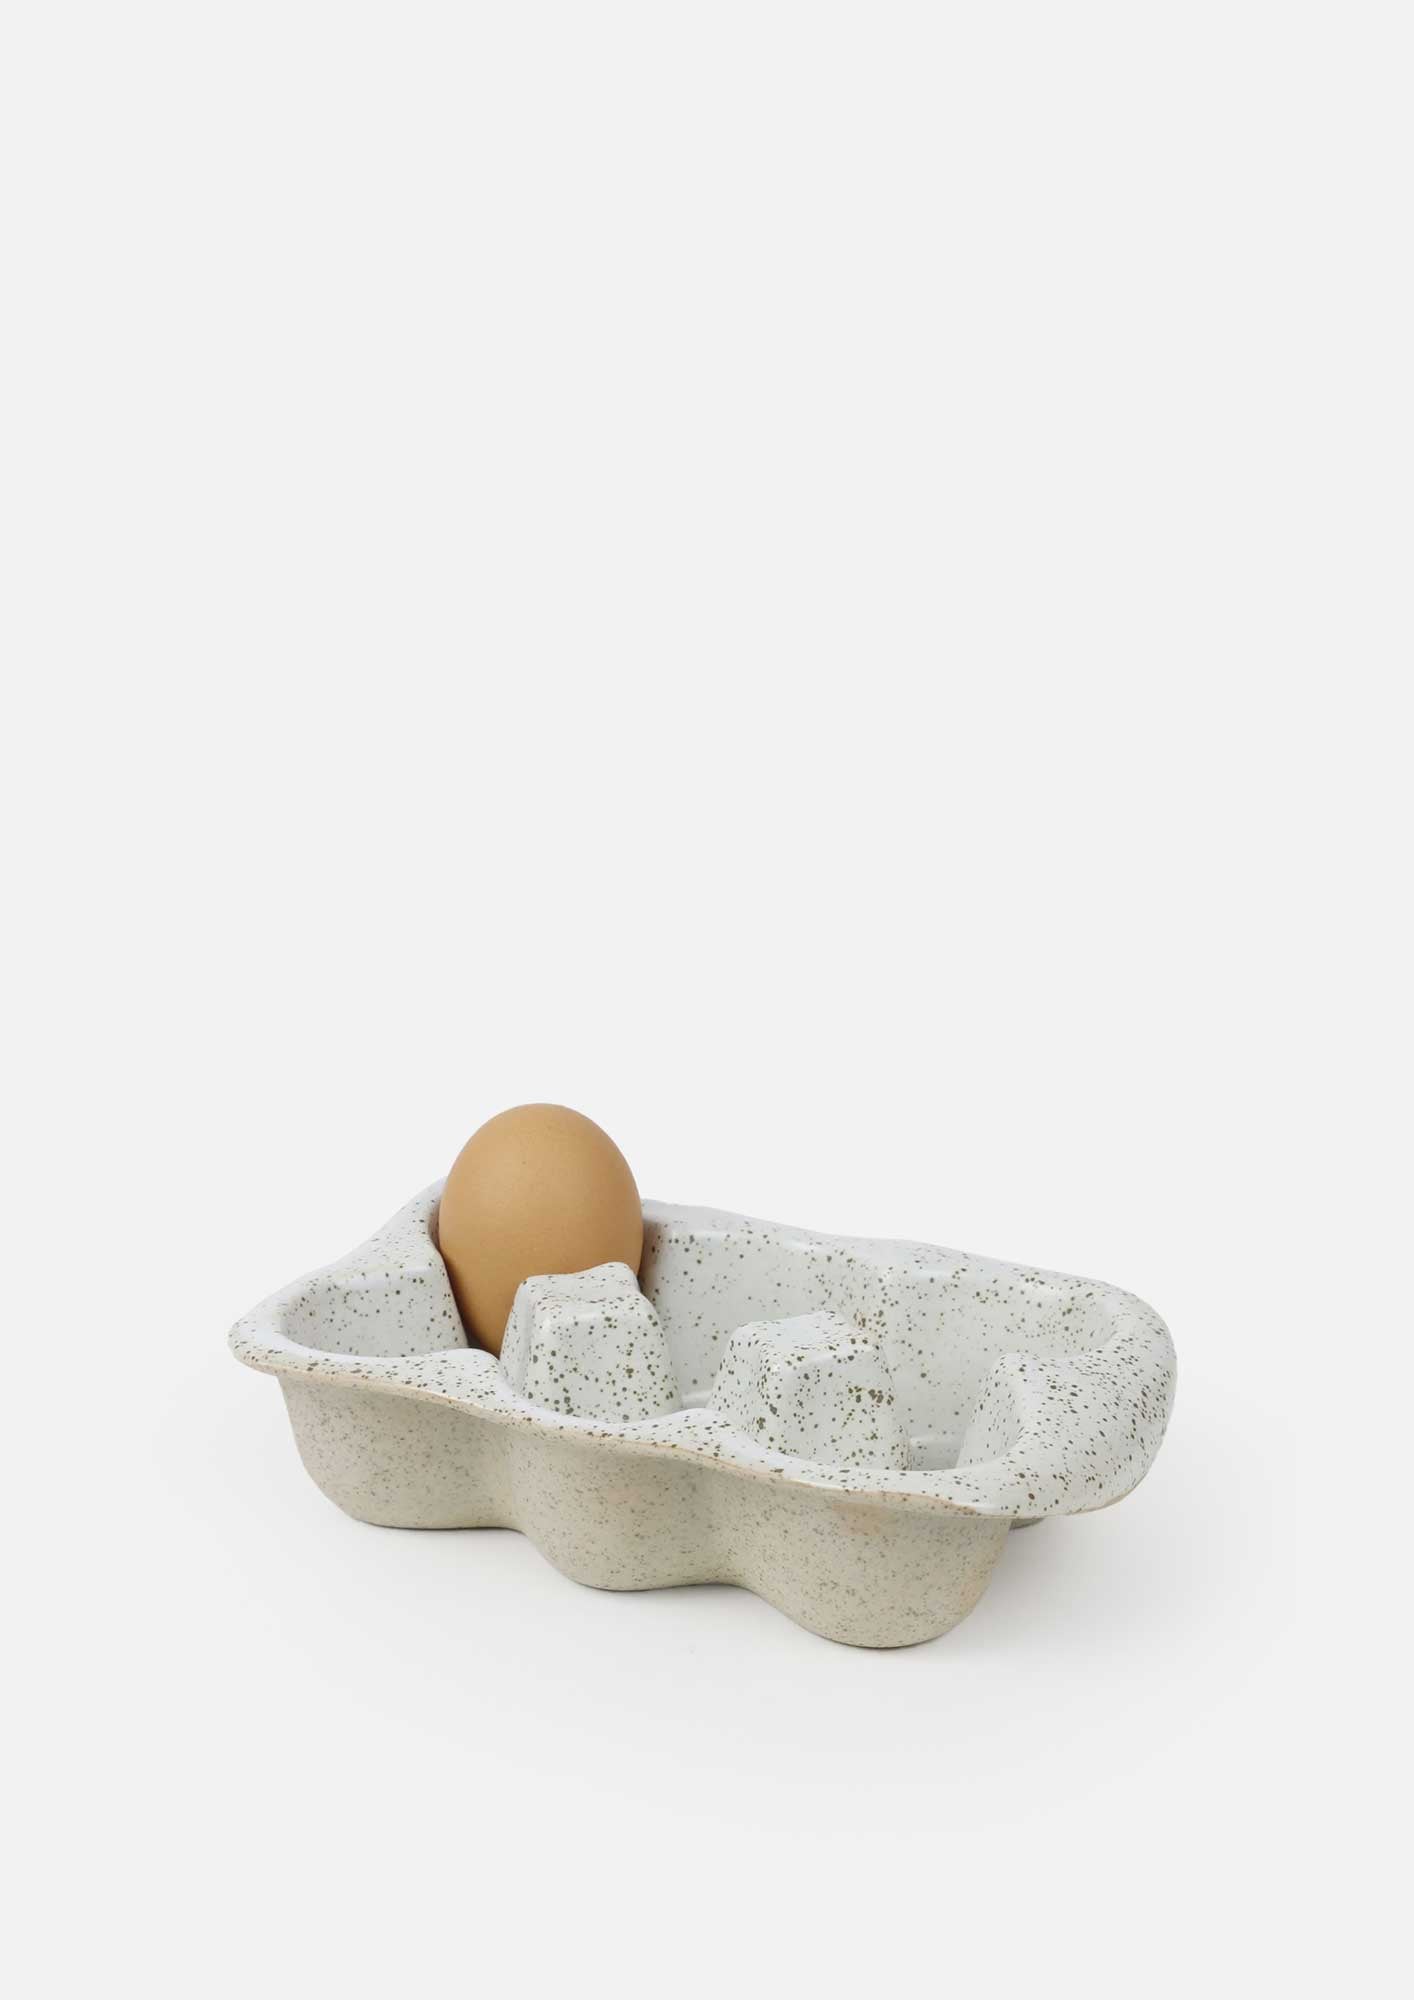 Egg Crate 6 Cup - White Garden to Table